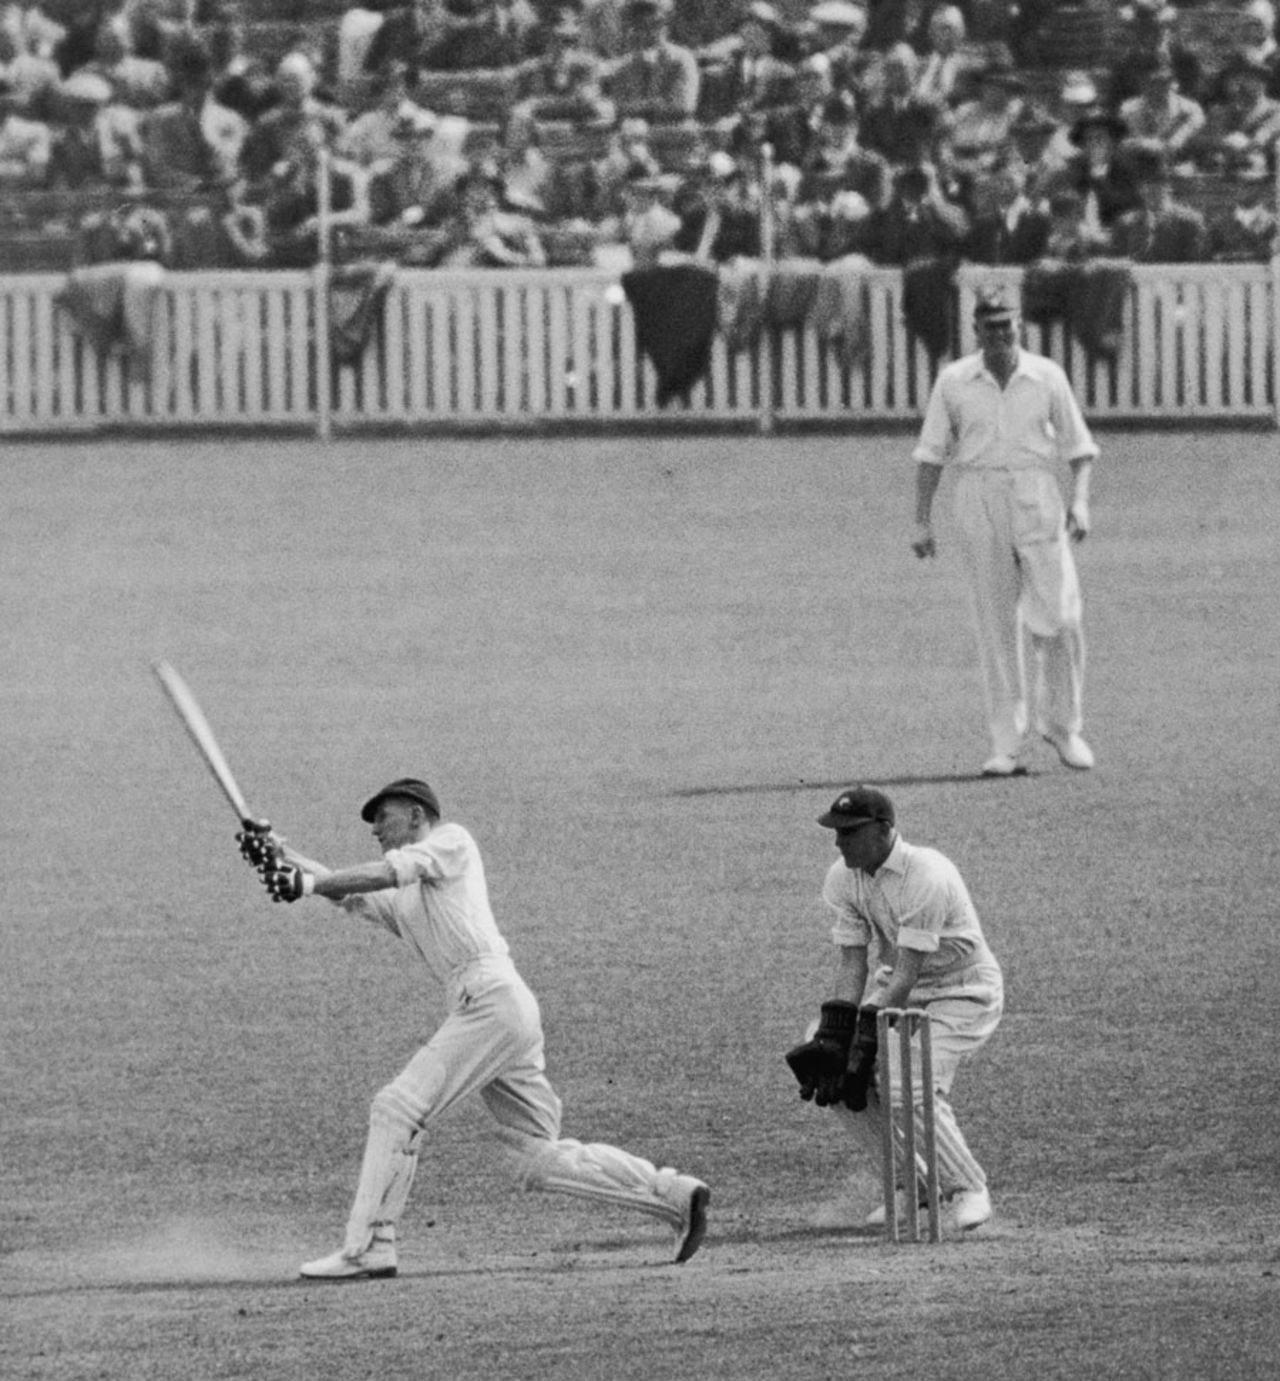 Len Hutton hits out during his 364, England v Australia, 5th Test, The Oval, 3rd day, August 23, 1938 